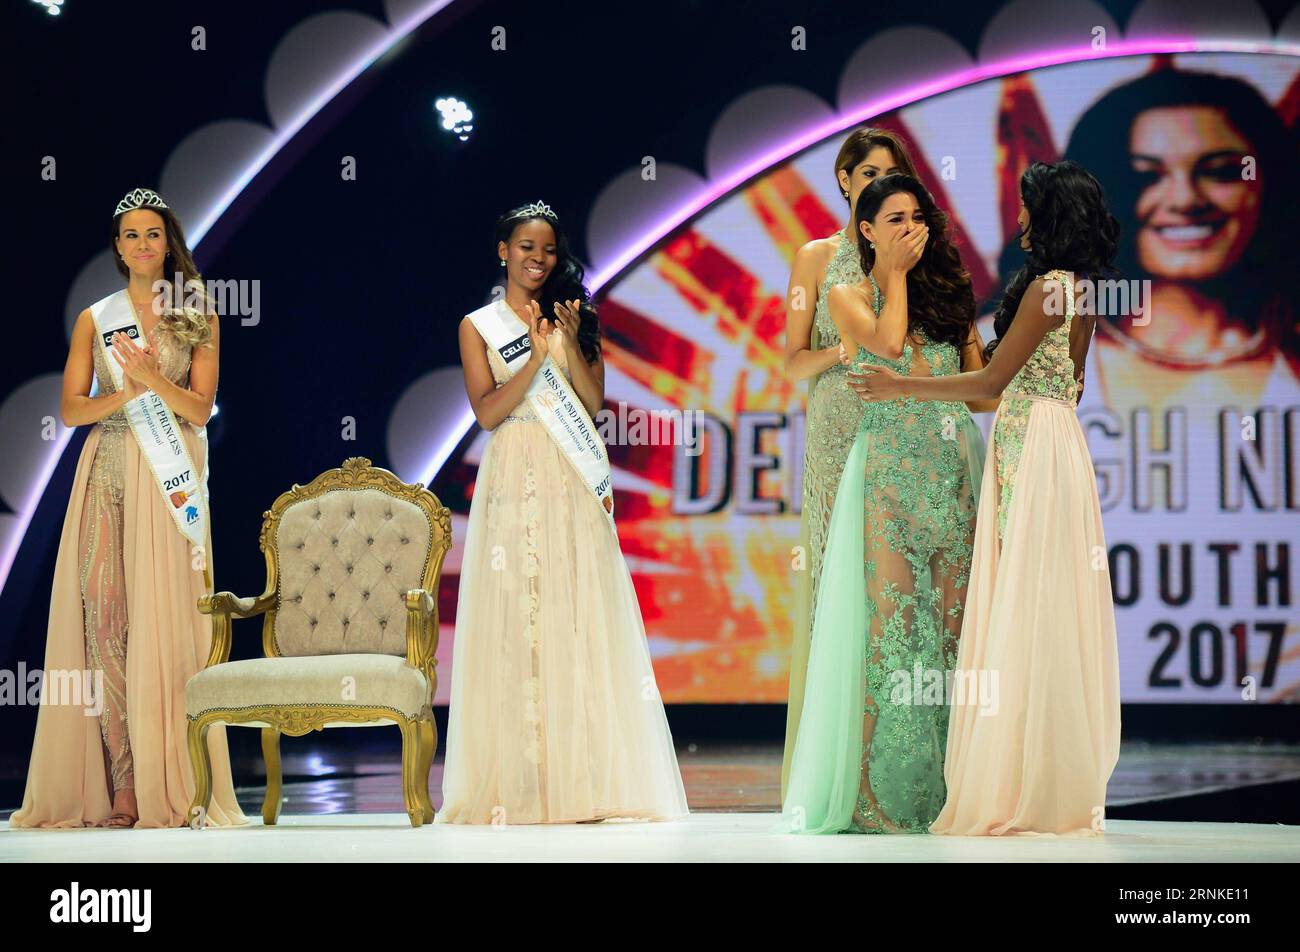 (170326) -- SUN CITY (SOUTH AFRICA), March 26, 2017 -- The first prize winner Demi-Leigh Nel-Peters (2nd R) reacts after the contest result was announced during the?Miss?South?Africa?2017 Pageant and Celebration in Sun City, North West Province,?South?Africa, on March 26, 2017. The?Miss?South?Africa?2017 Pageant and Celebration was held here Sunday. Demi-Leigh Nel-Peters from Sedgefield in the Western Cape Province, a 21-year-old part-time model, was crowned?Miss?South?Africa?2017 with a prize of one million rand (about 80,000 US dollars), and the runners-up are Ade van Heerden (1st Princess) Stock Photo